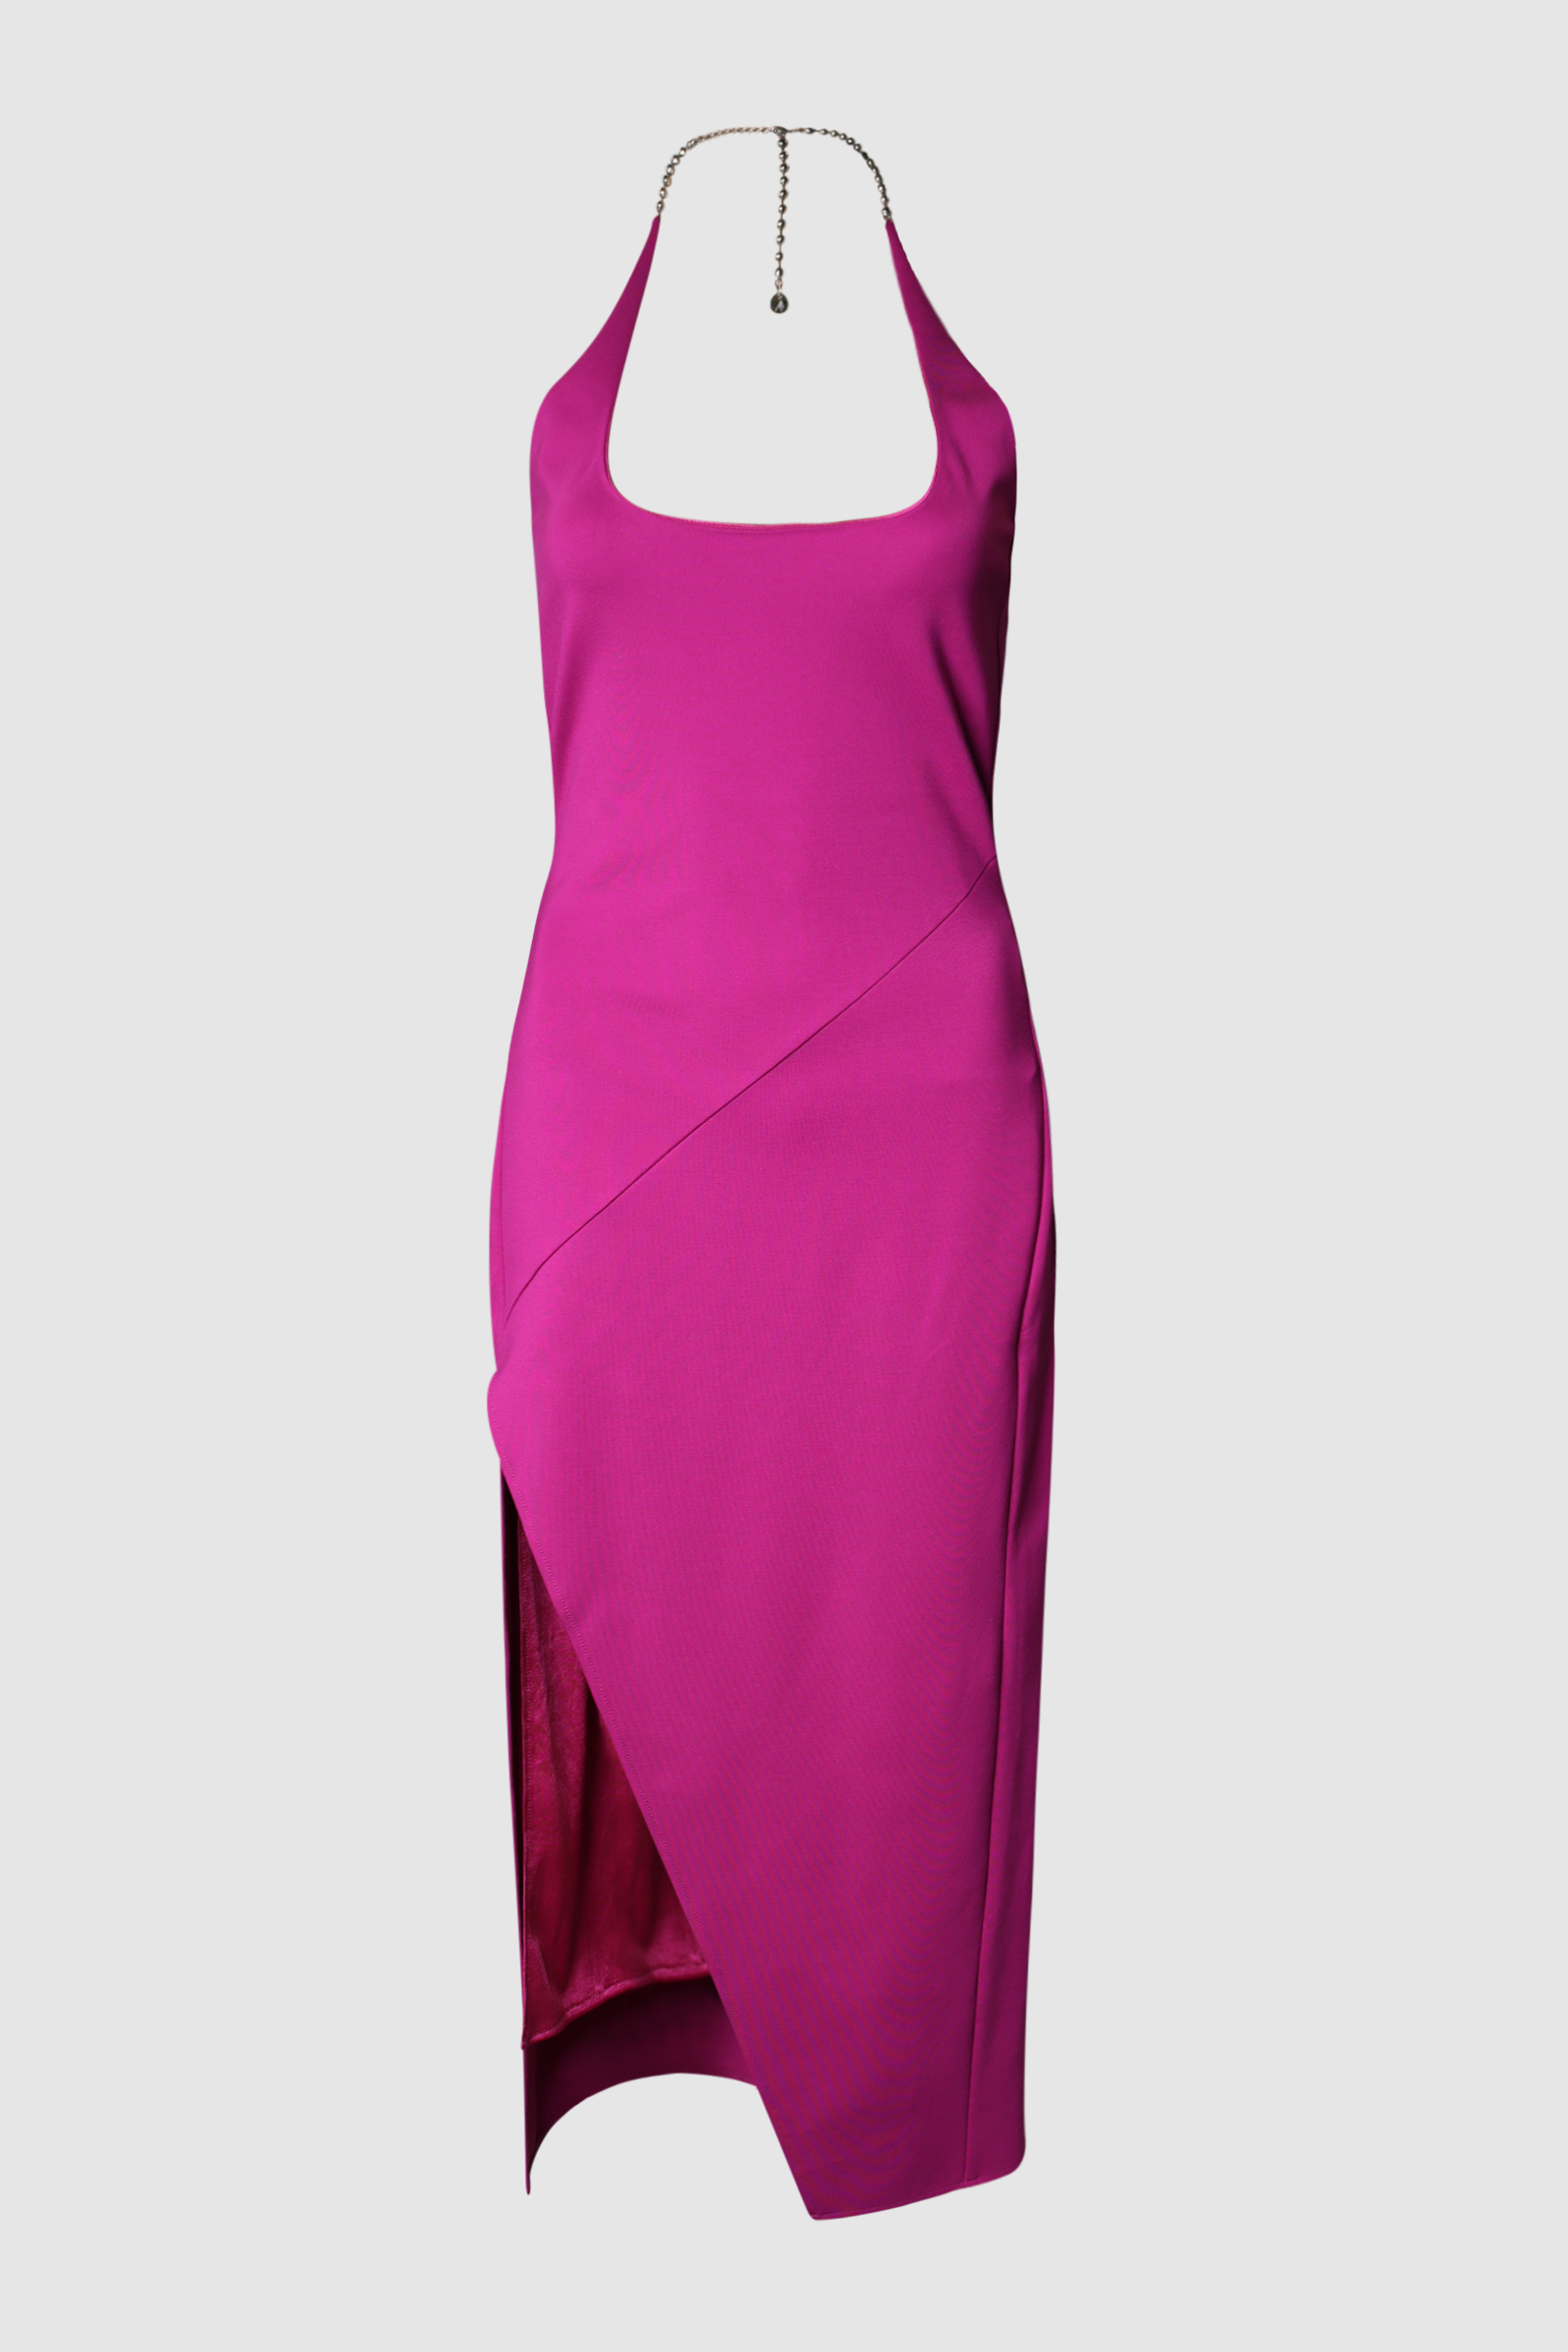 Corinne Halter Neck Tech Crepe Gown - The Pre Loved Closet